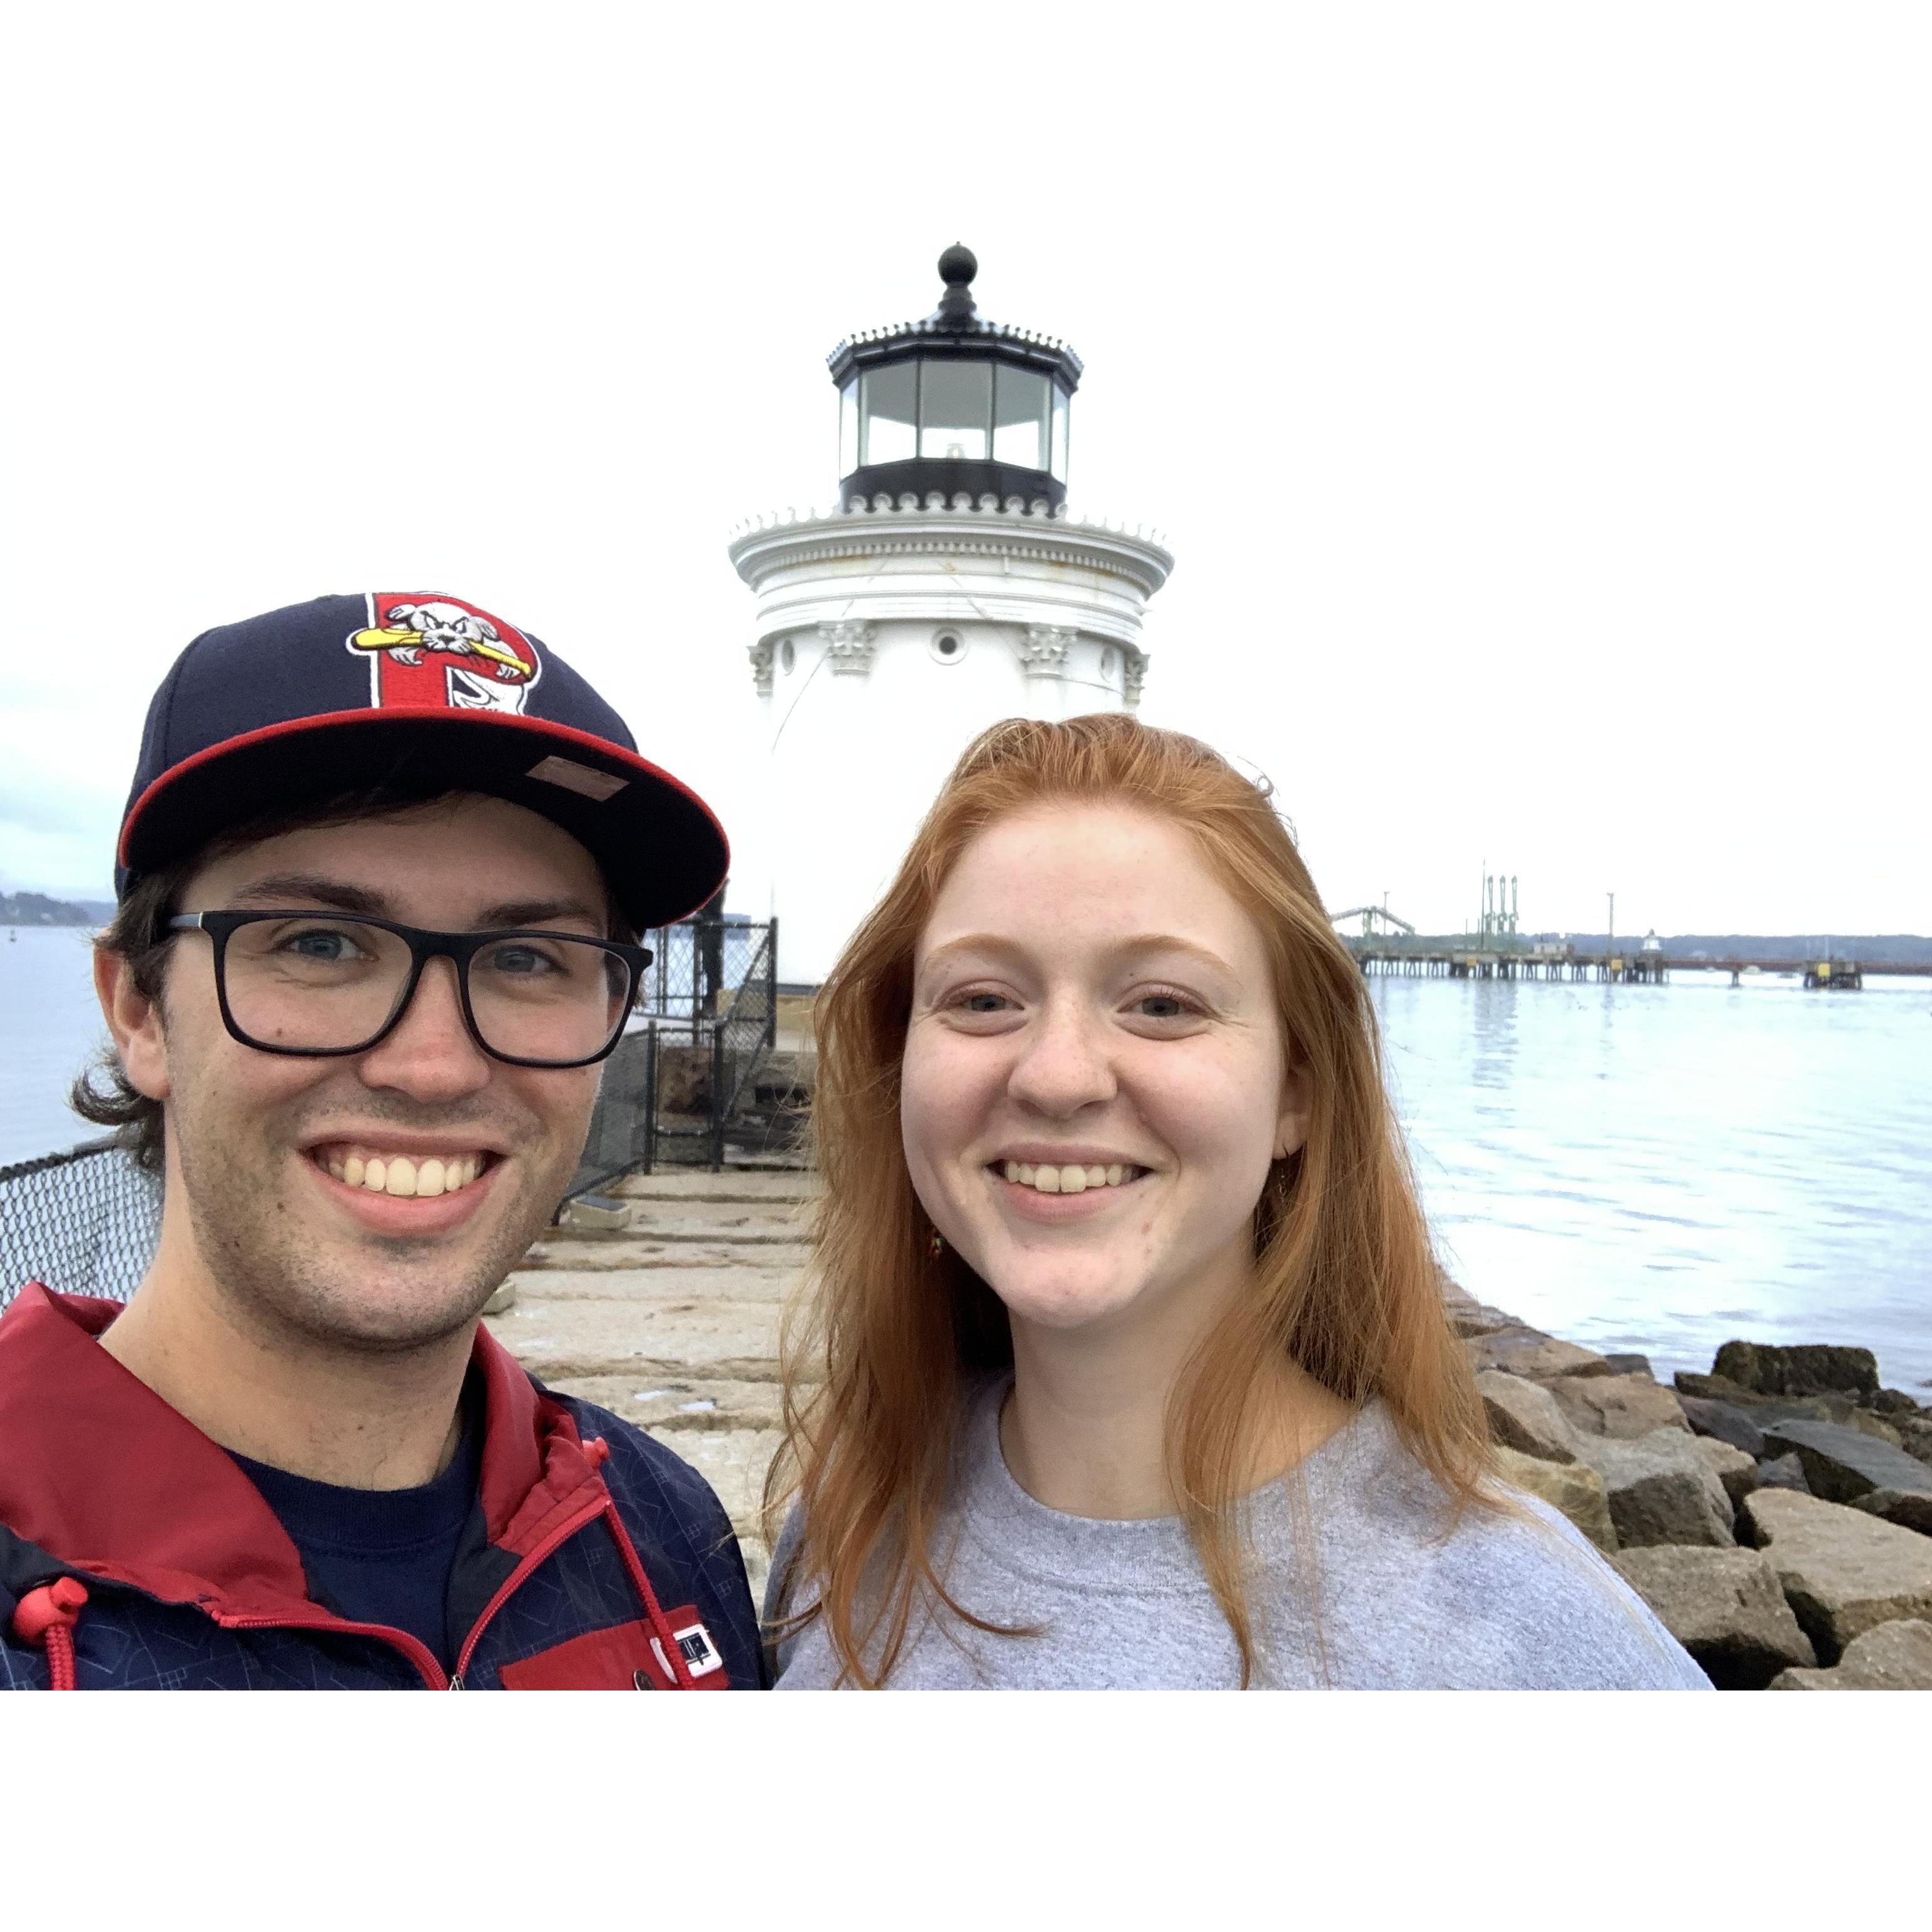 Our first trip together - Portland, Maine! Labor Day Weekend, 2019